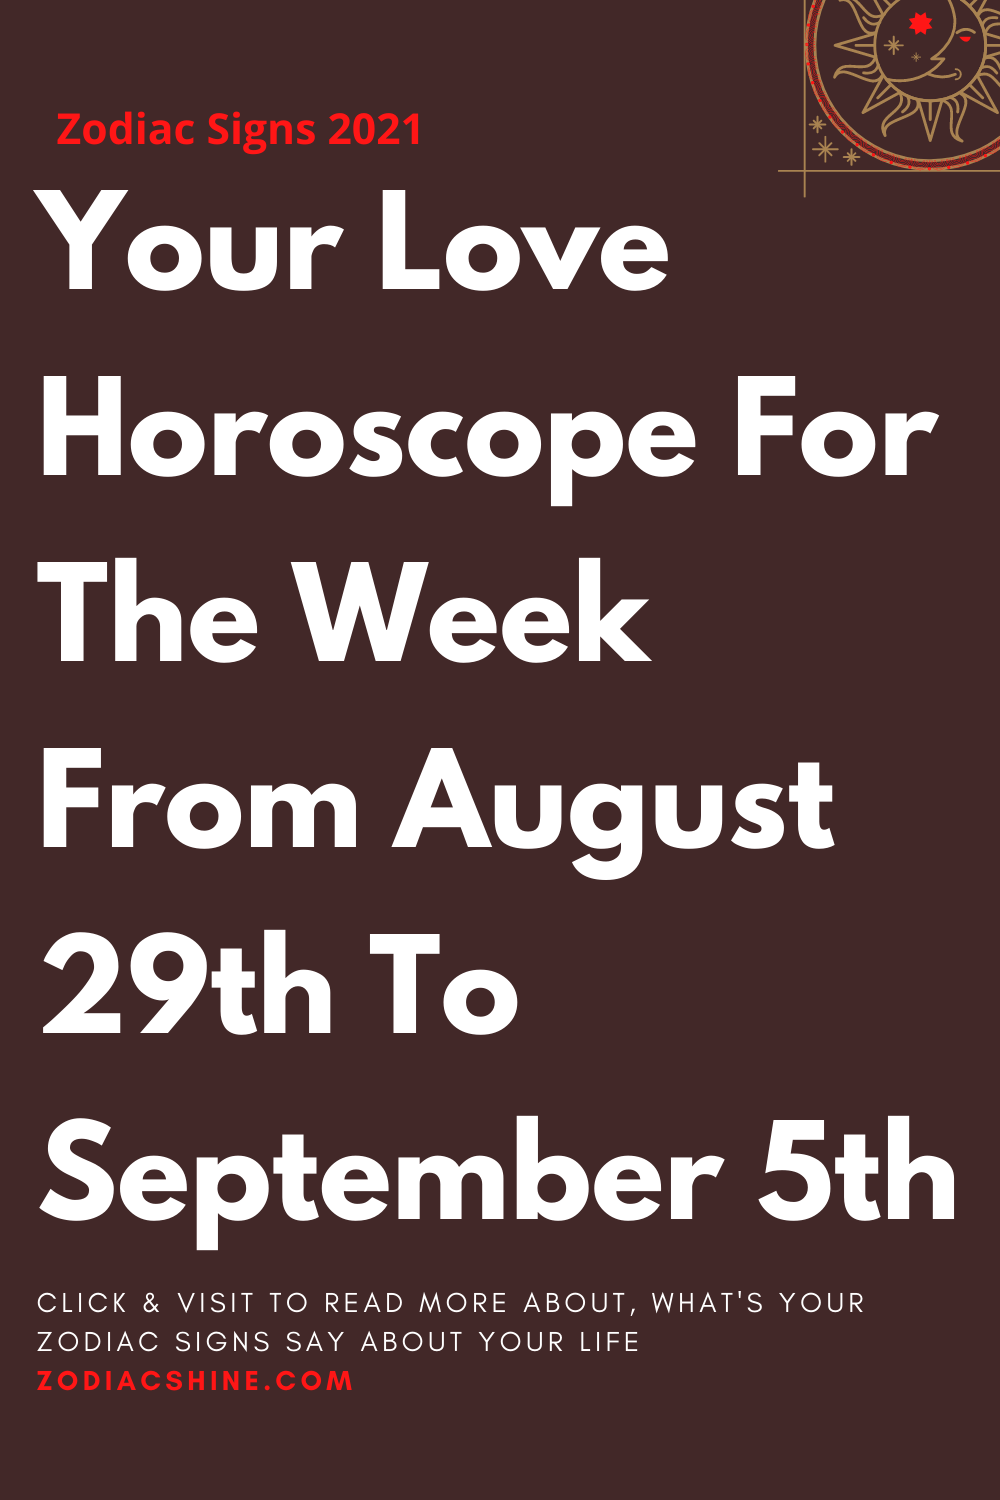 Your Love Horoscope For The Week From August 29th To September 5th